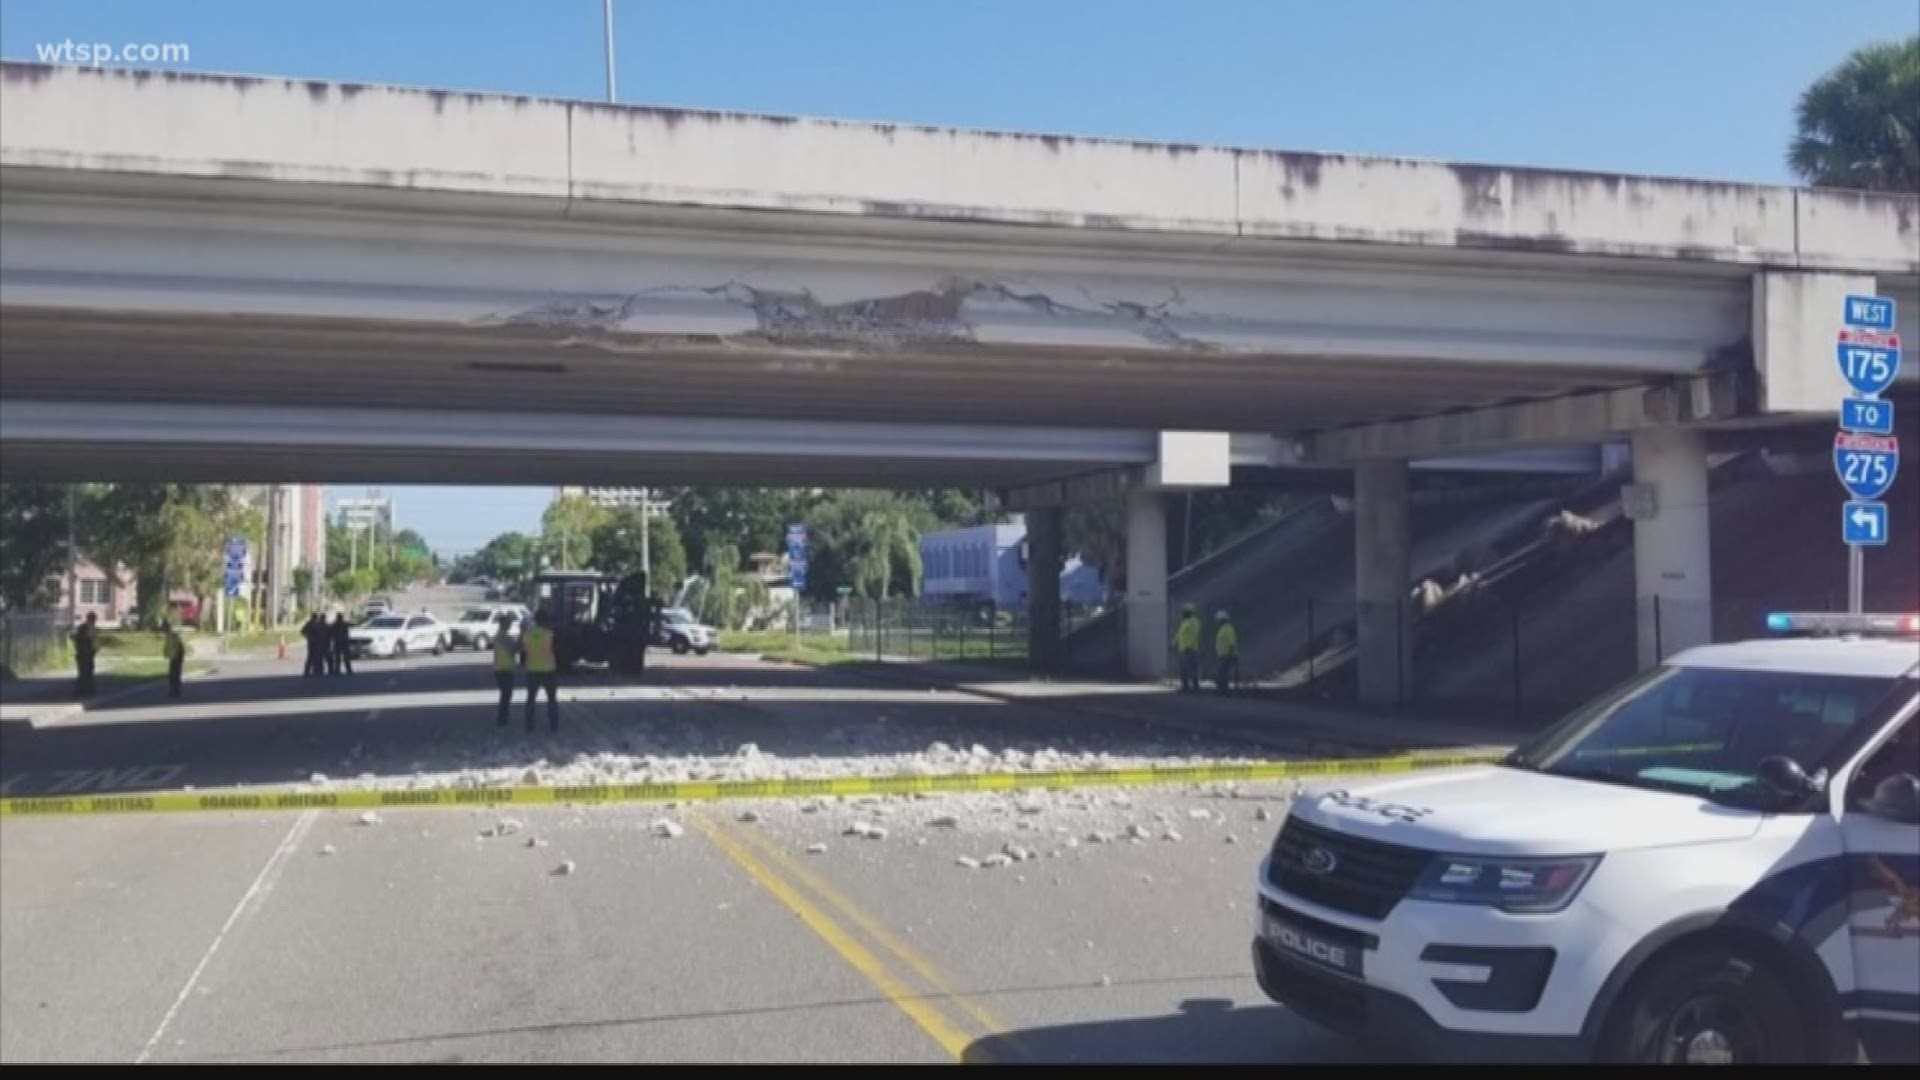 FDOT now has to check the bridge for structural integrity. https://on.wtsp.com/2kDRewb